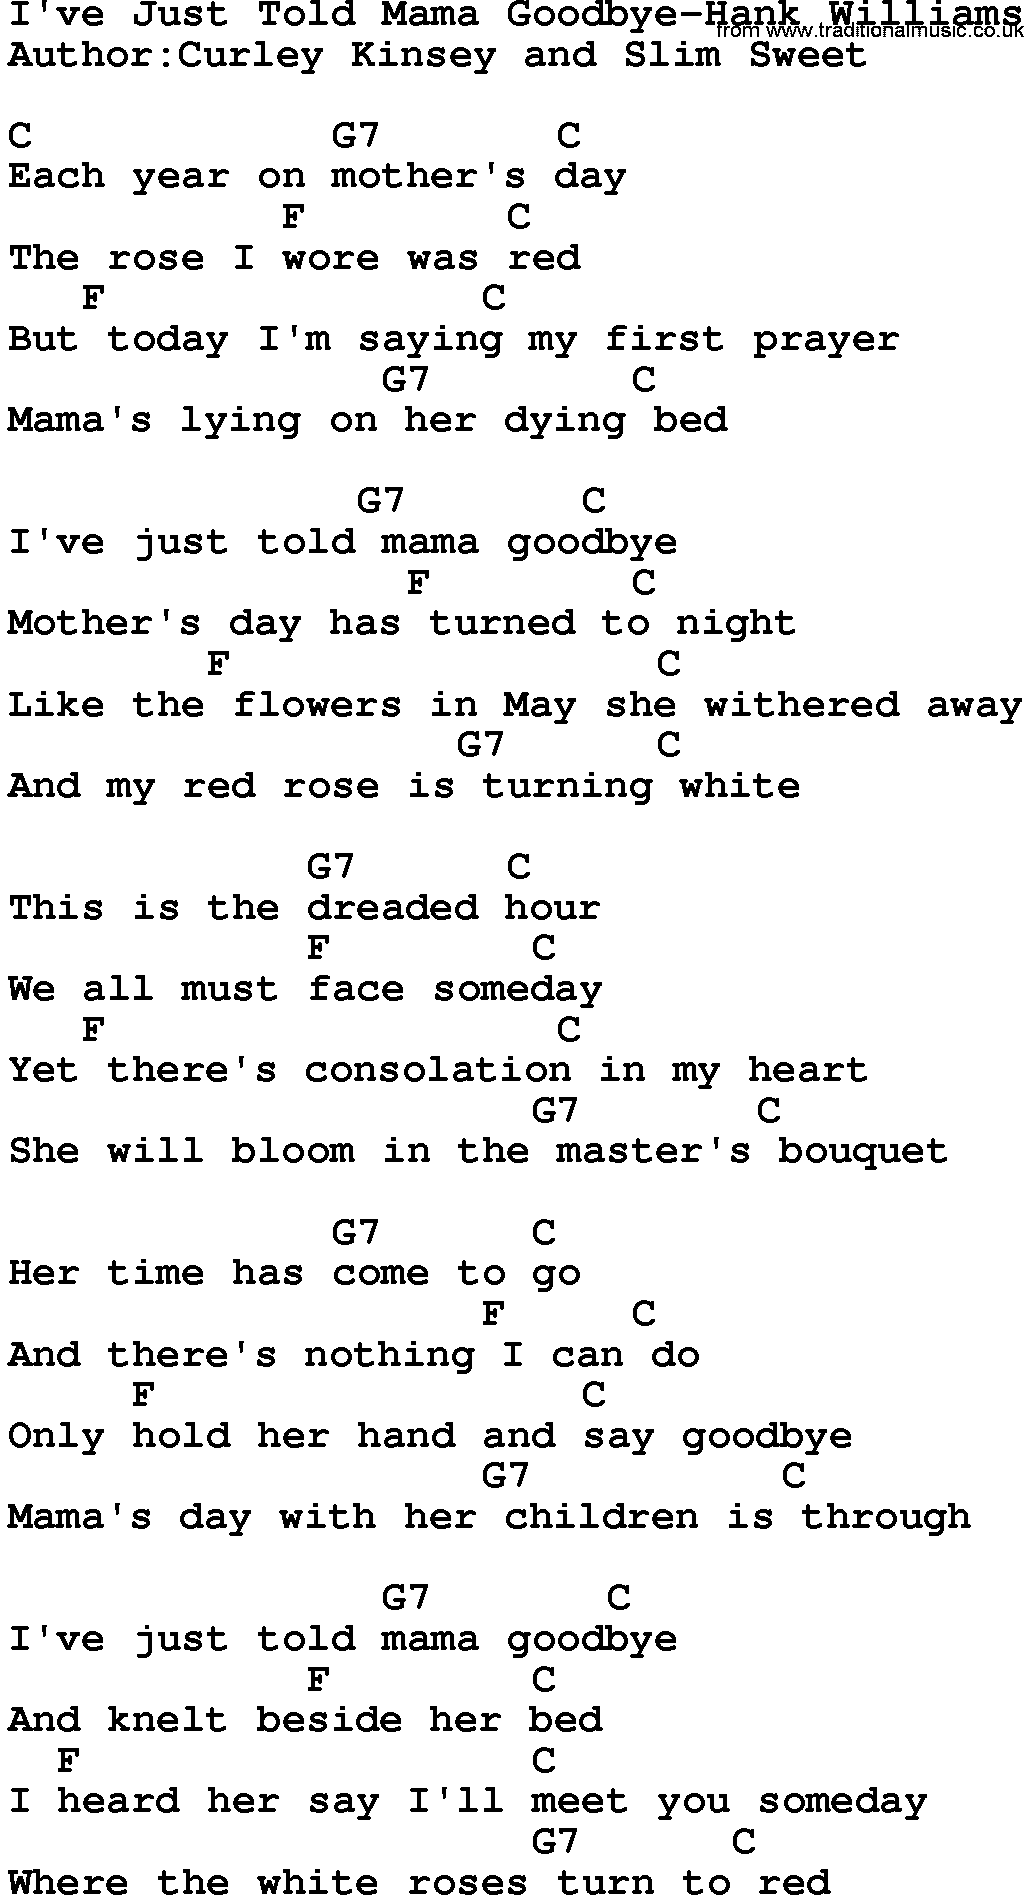 Country music song: I've Just Told Mama Goodbye-Hank Williams lyrics and chords